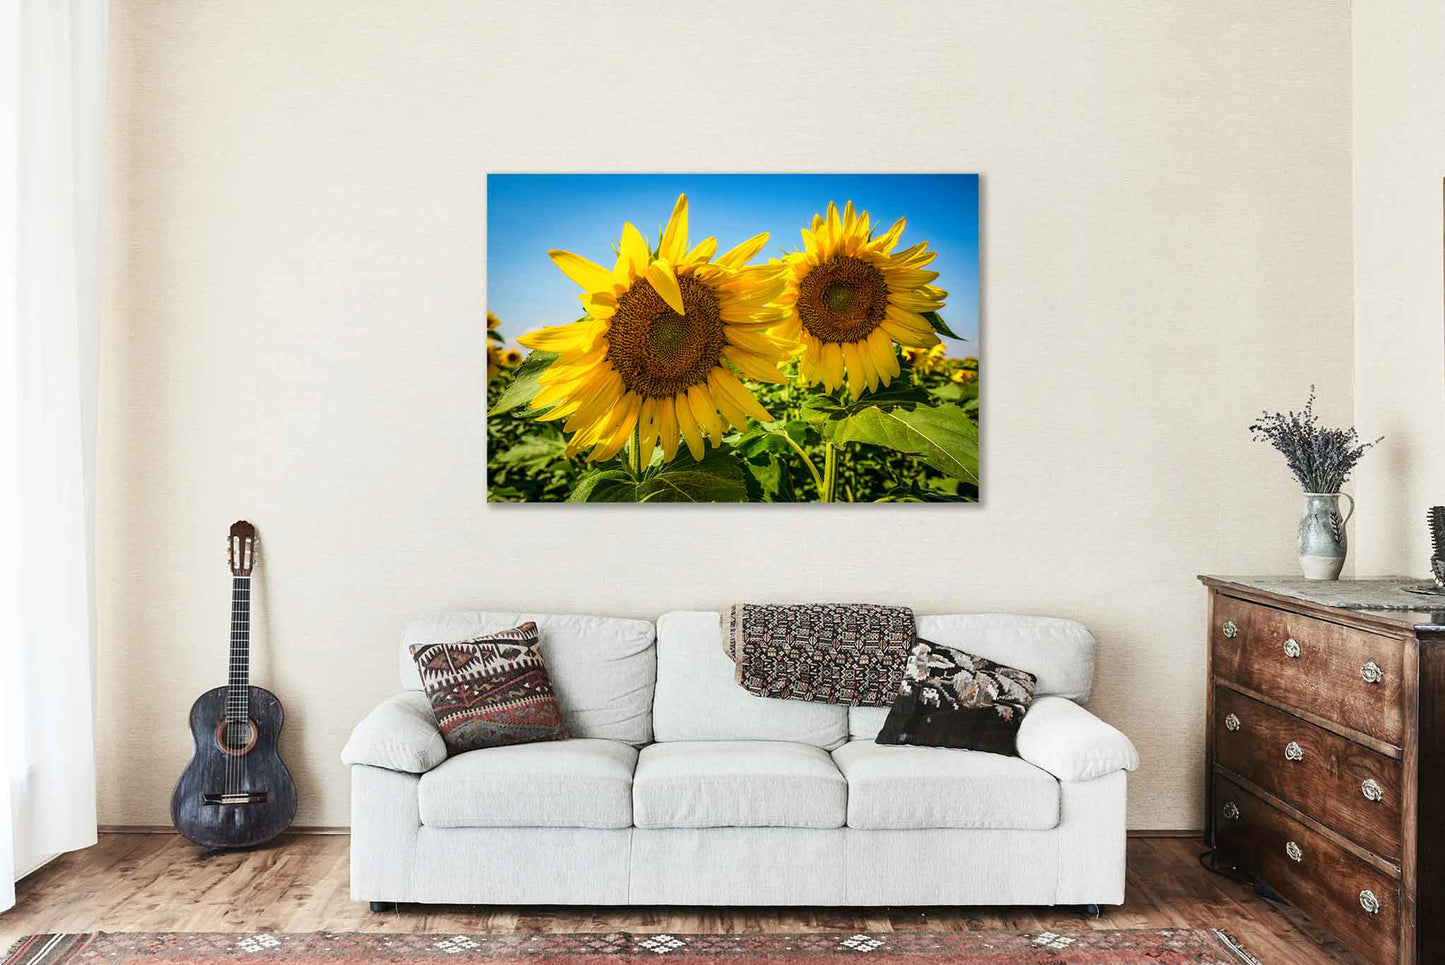 Country Metal Print (Ready to Hang) Photo of Two Sunflowers on Autumn Day in Kansas Farm Wall Art Botanical Decor